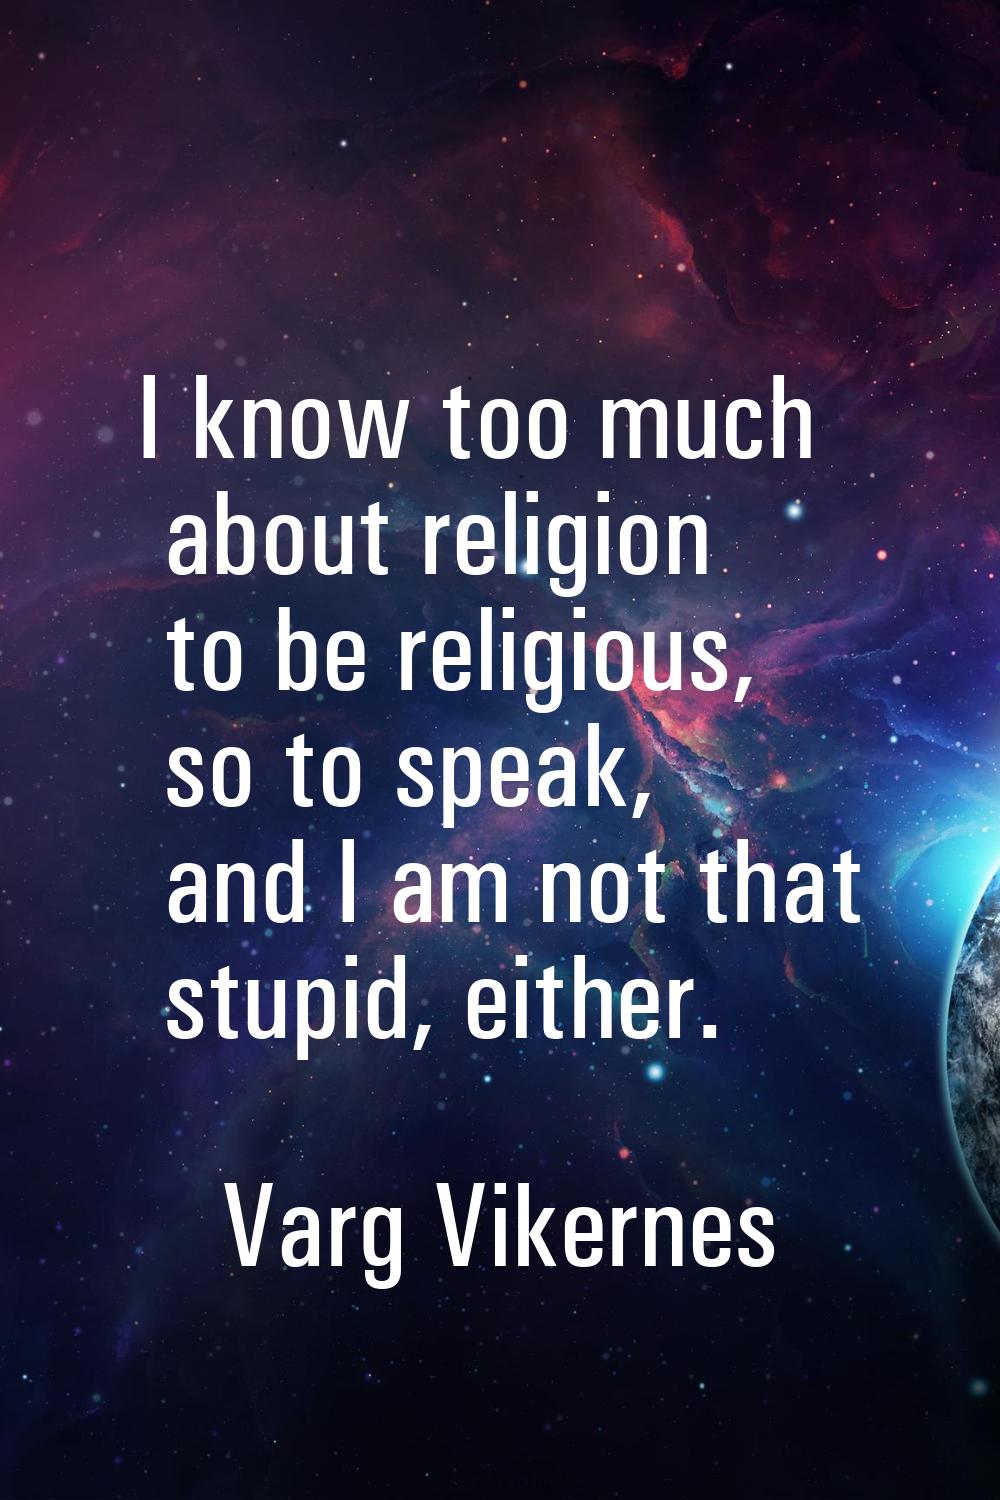 I know too much about religion to be religious, so to speak, and I am not that stupid, either.